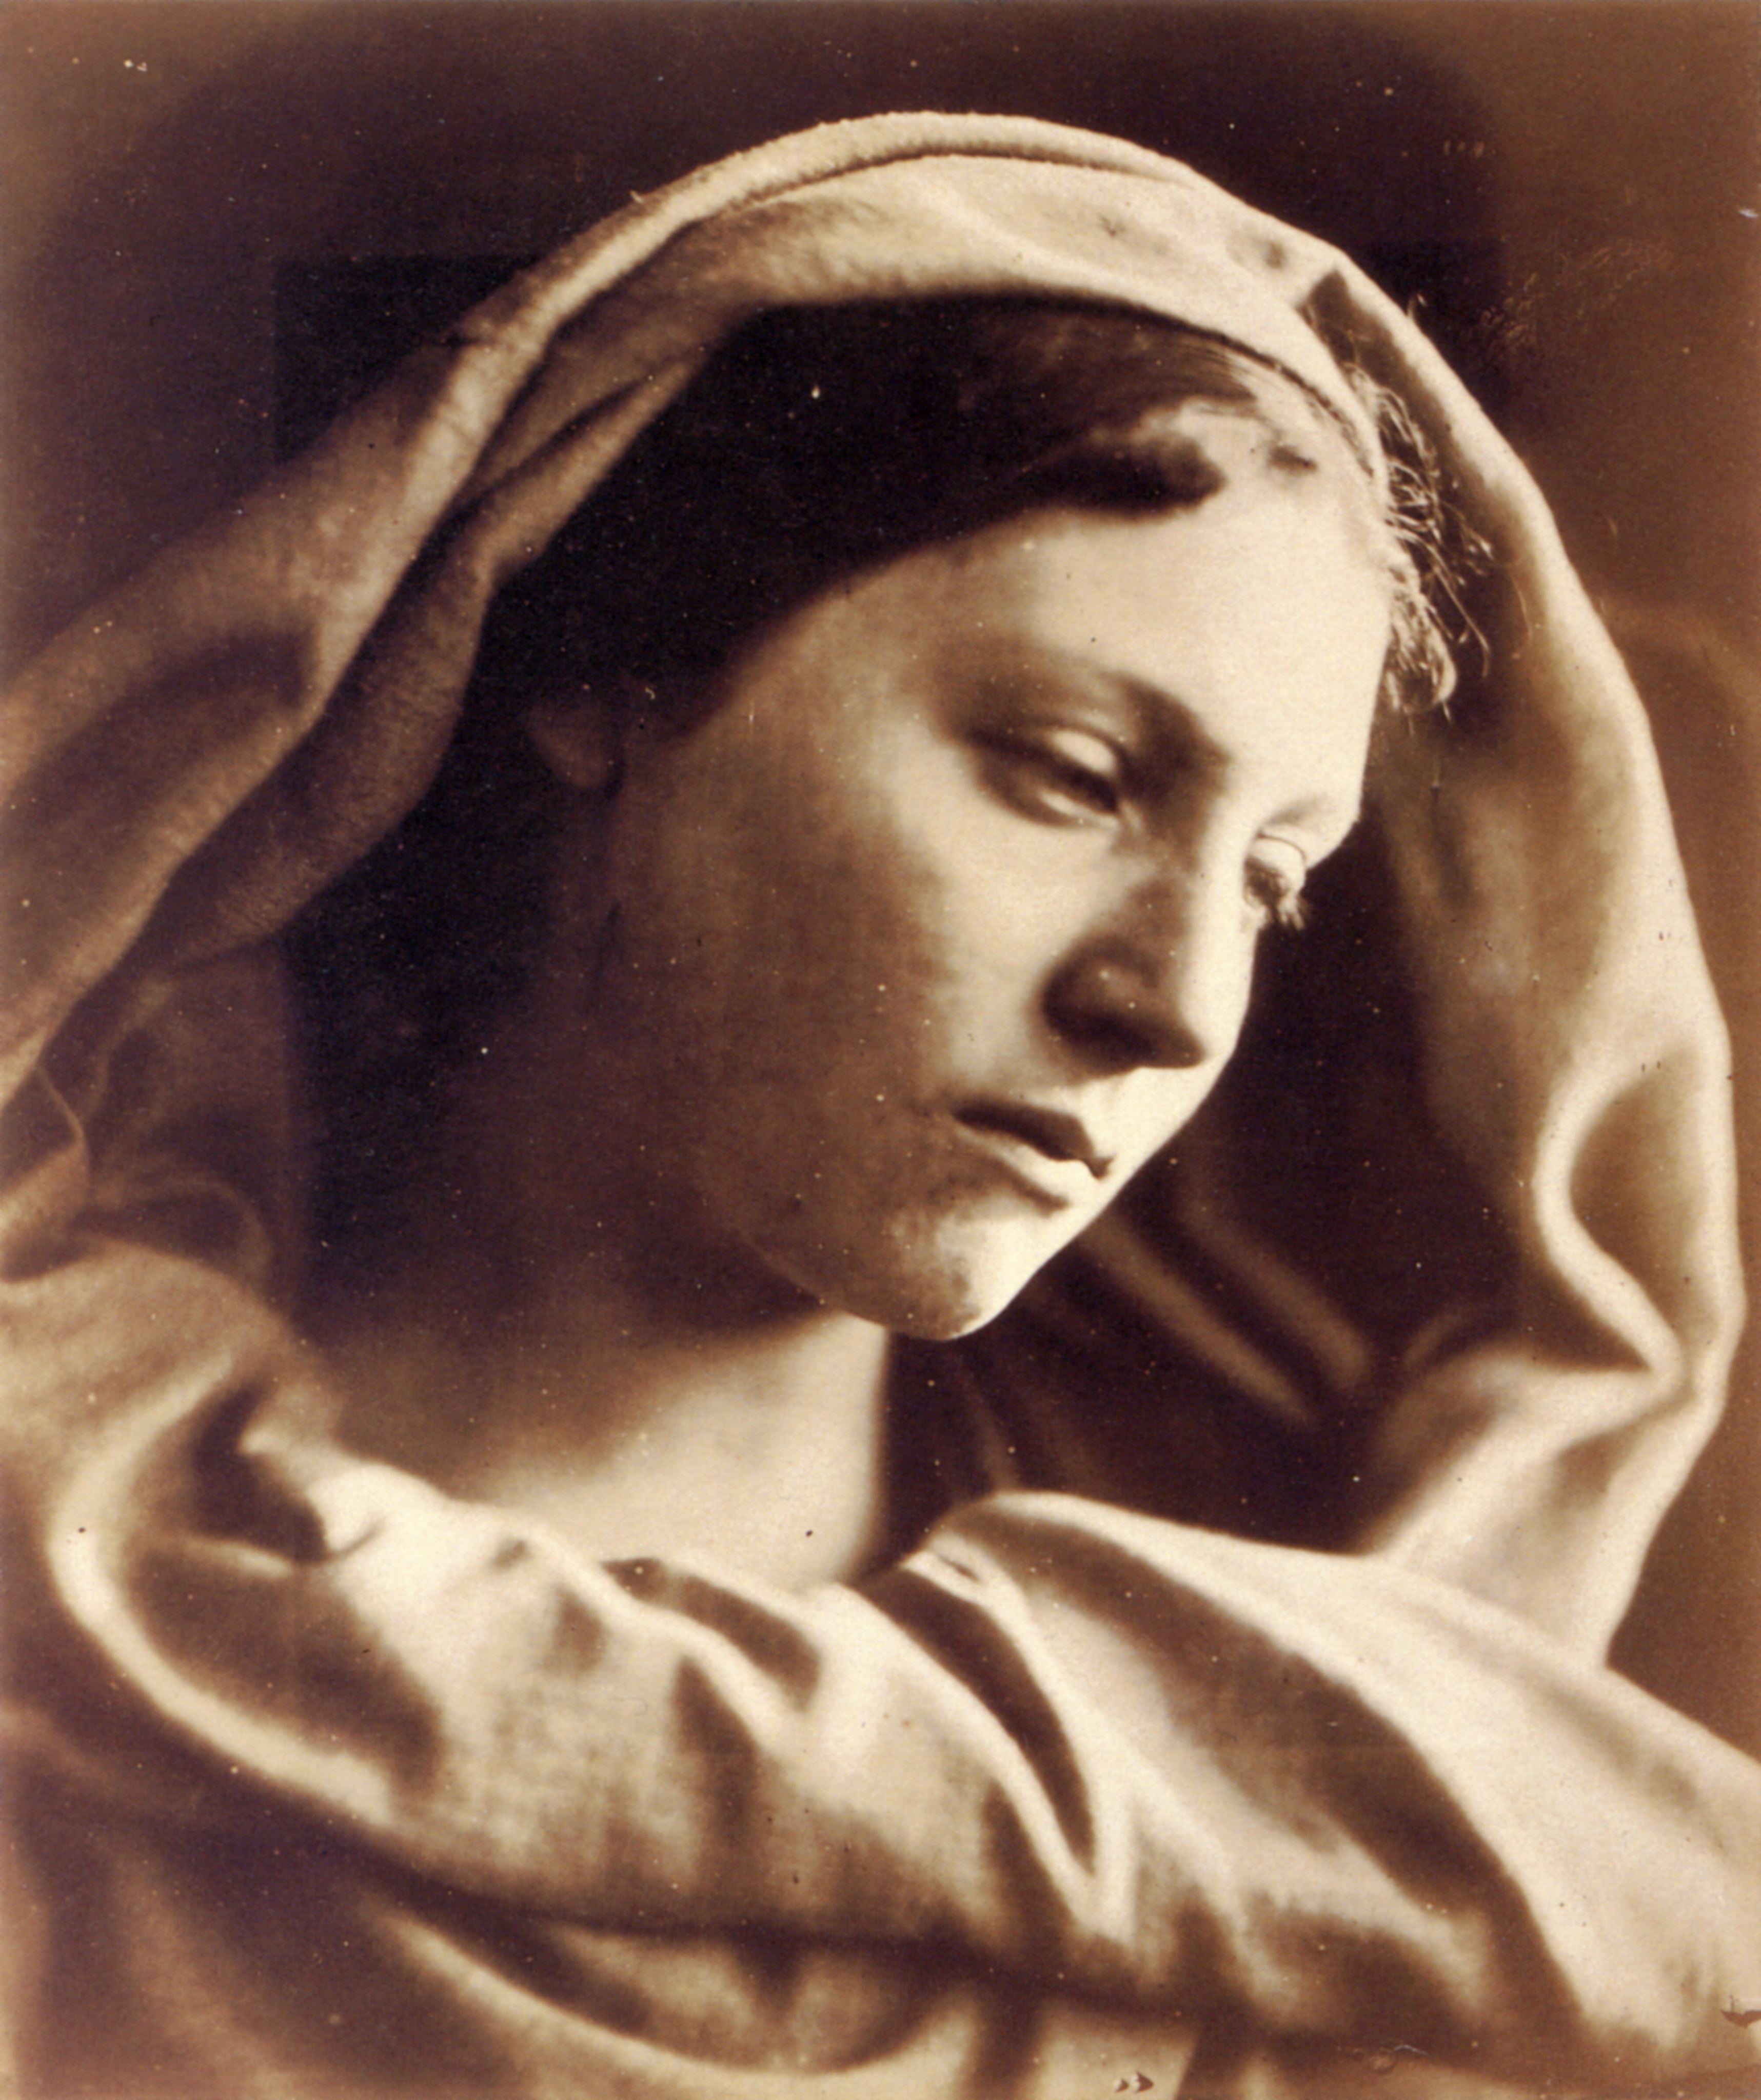 http://upload.wikimedia.org/wikipedia/commons/7/73/Mary_Mother,_by_Julia_Margaret_Cameron.jpg